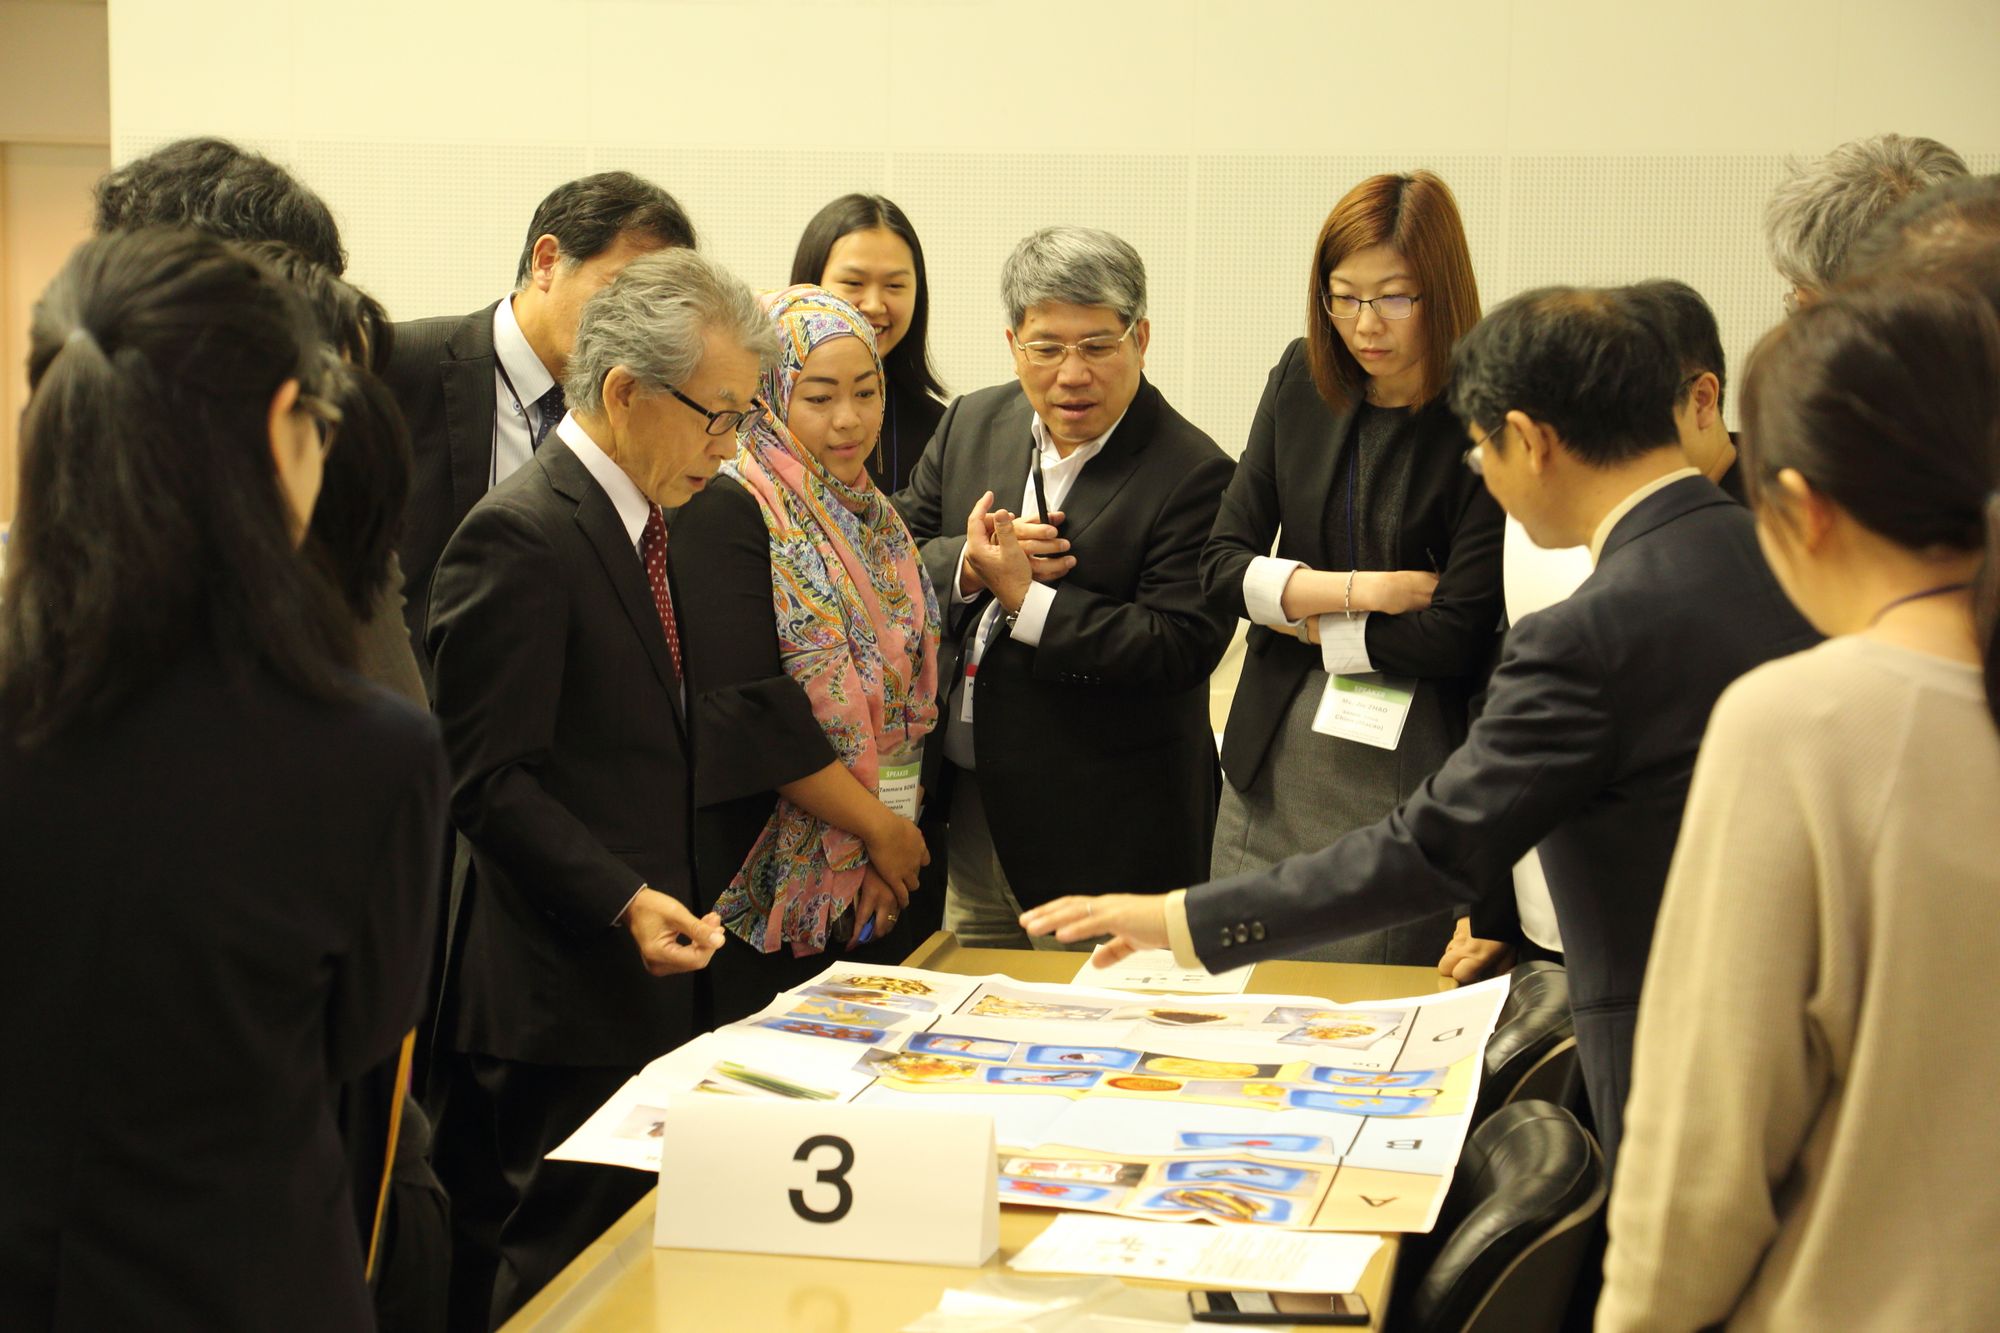 Discussions on the individual classification of tricky food items in the course of the interactive sorting analysis showed cultural differences and preferences of the represented countries also in the working group facilitated by Mr. Dr. Hajime Yamakawa from Kyoto Prefectural University.